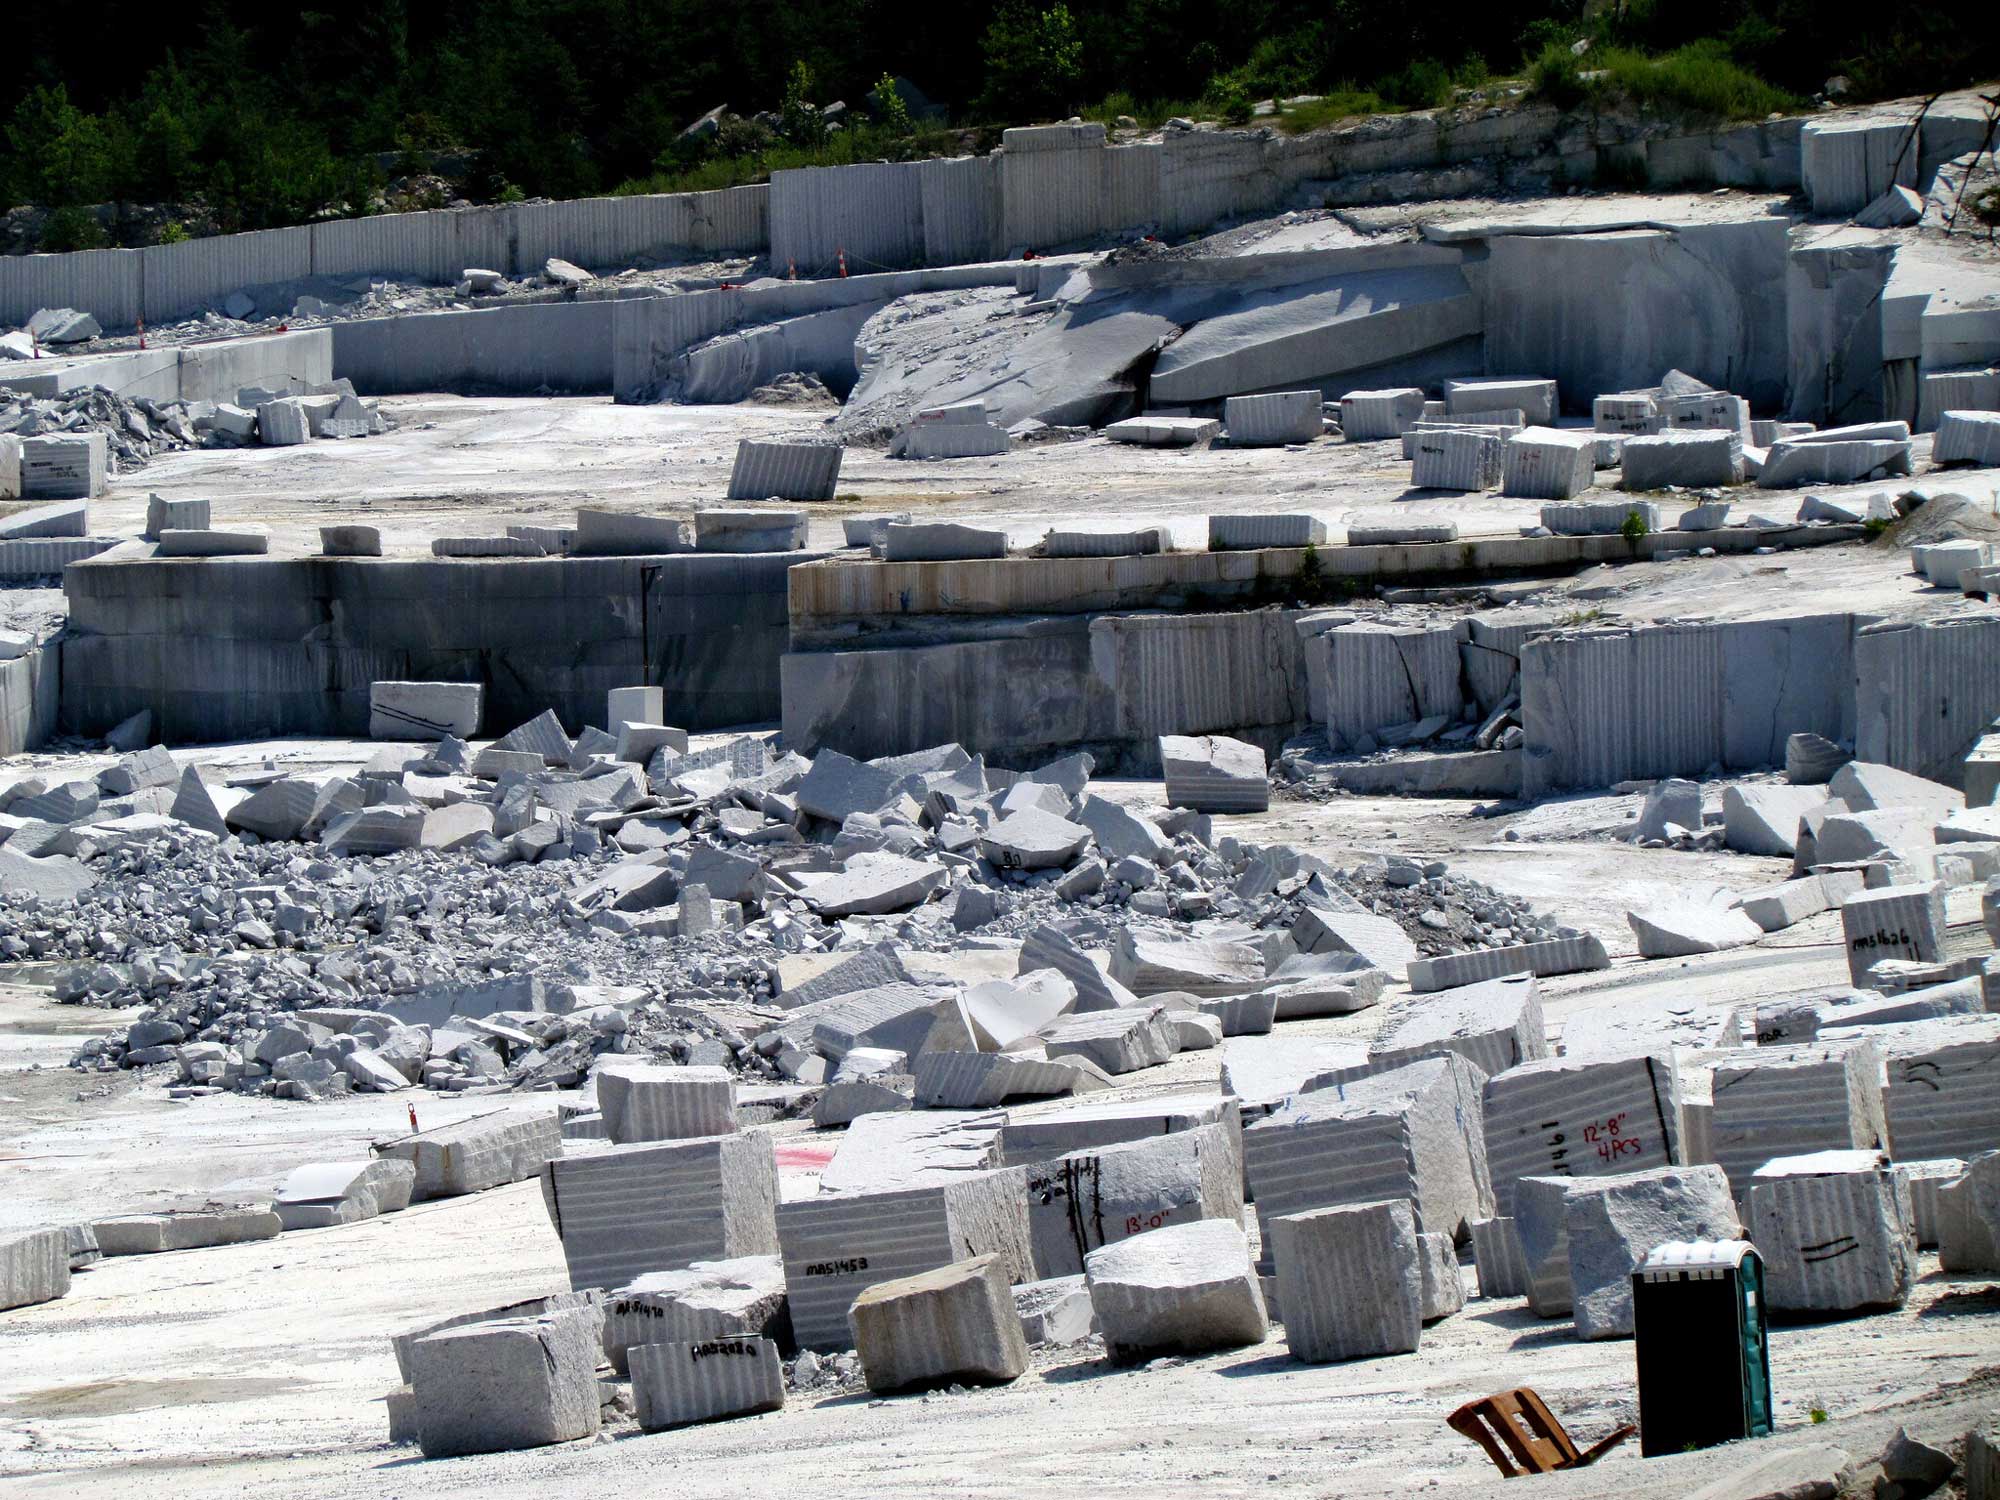 Photograph showing large blocks of rock inside the Mt. Airy Quarry in North Carolina.